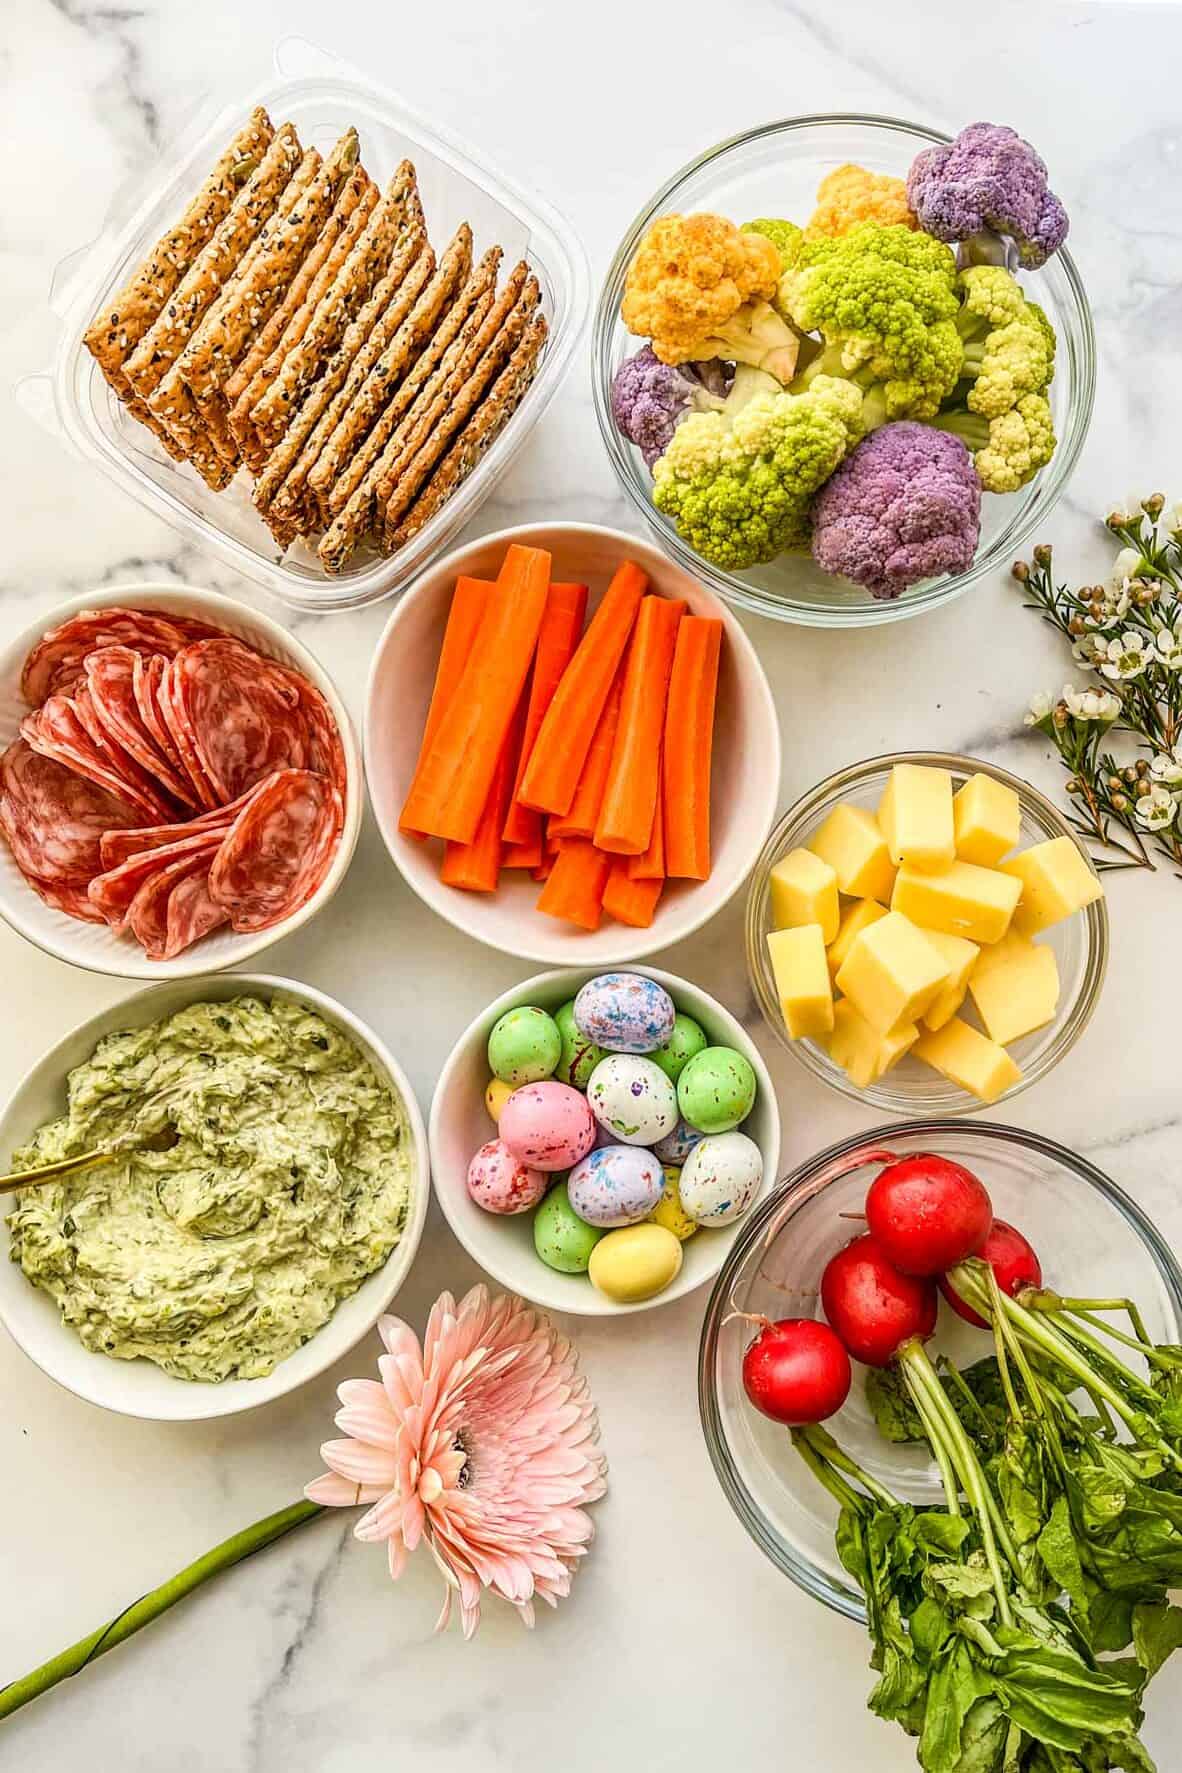 Crackers, cauliflower, carrots, salami, cheese, candy, dip, flowers, and radishes.